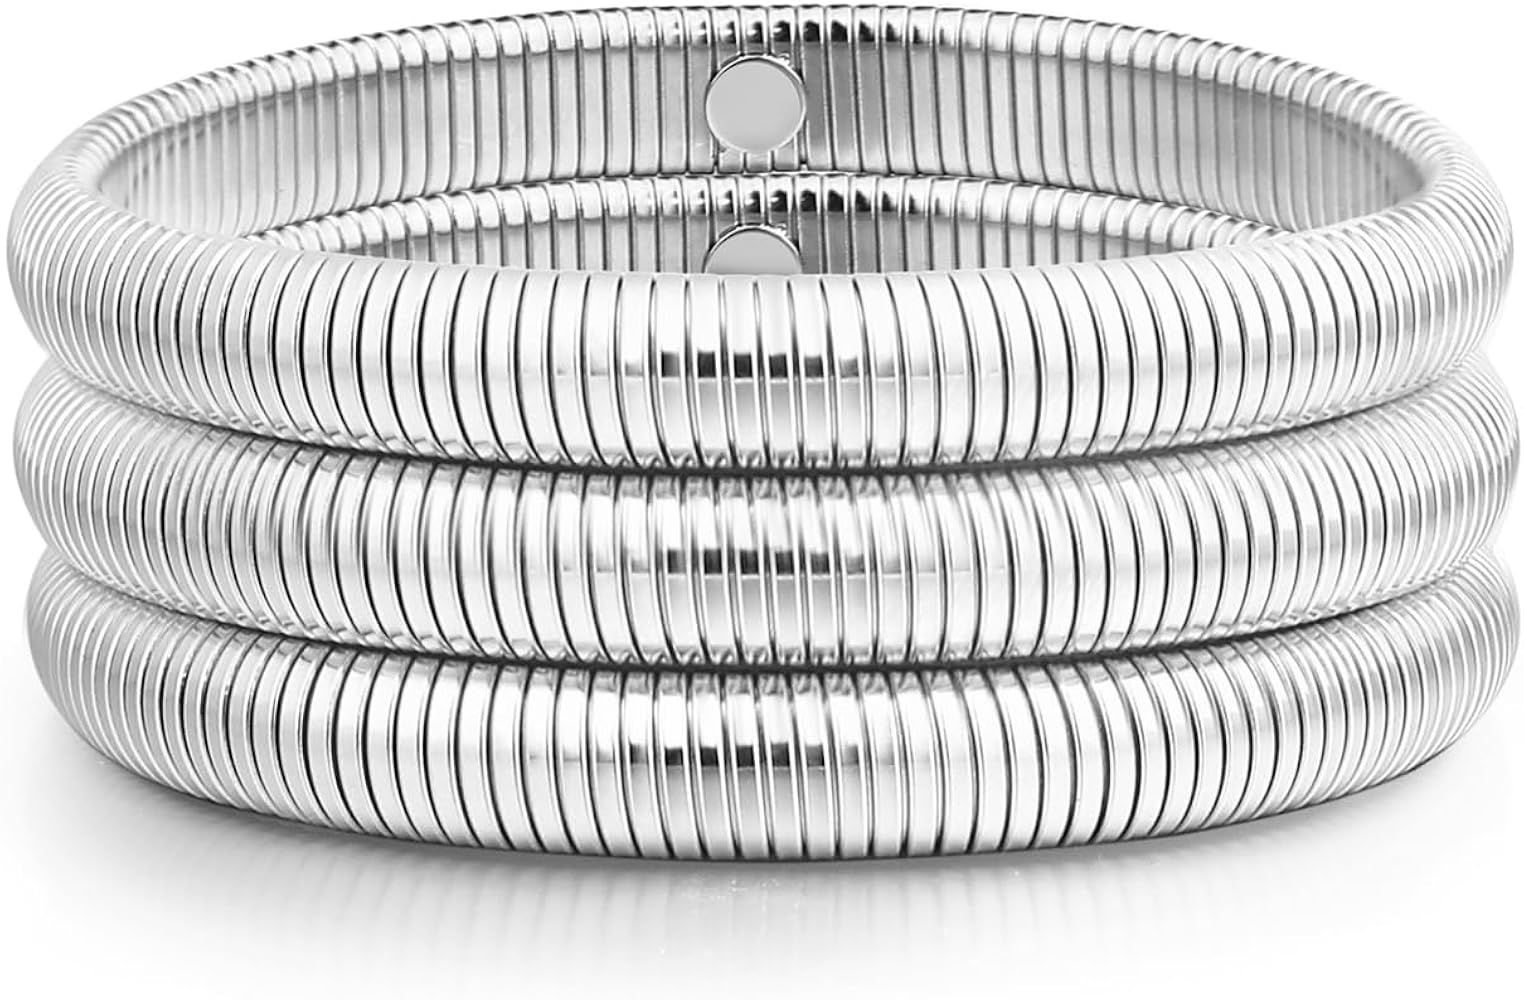 Gold Bangle multi-layer Bracelets for Women Stretchy Stainless steel Link Chain Flexible Wide Wri... | Amazon (US)